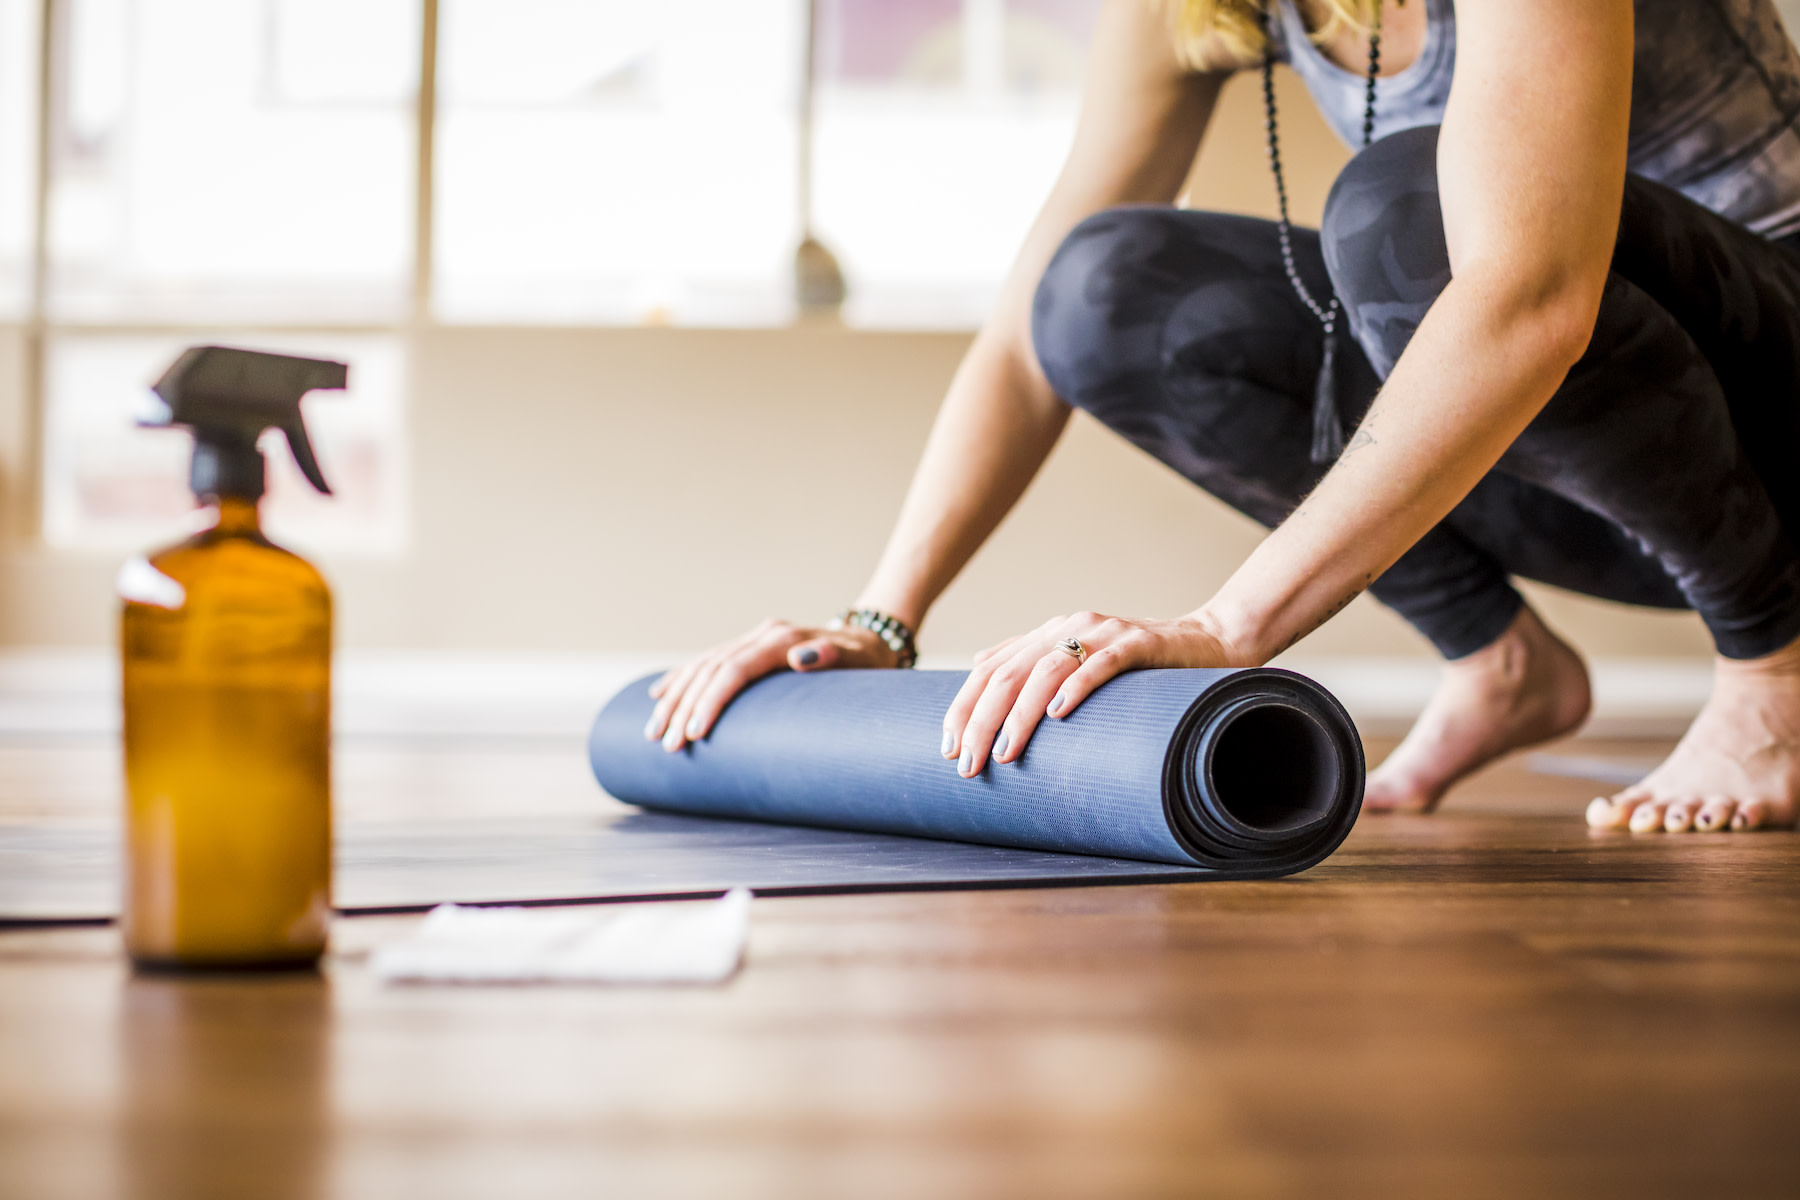 A woman cleaning her yoga mat and rolling it up.